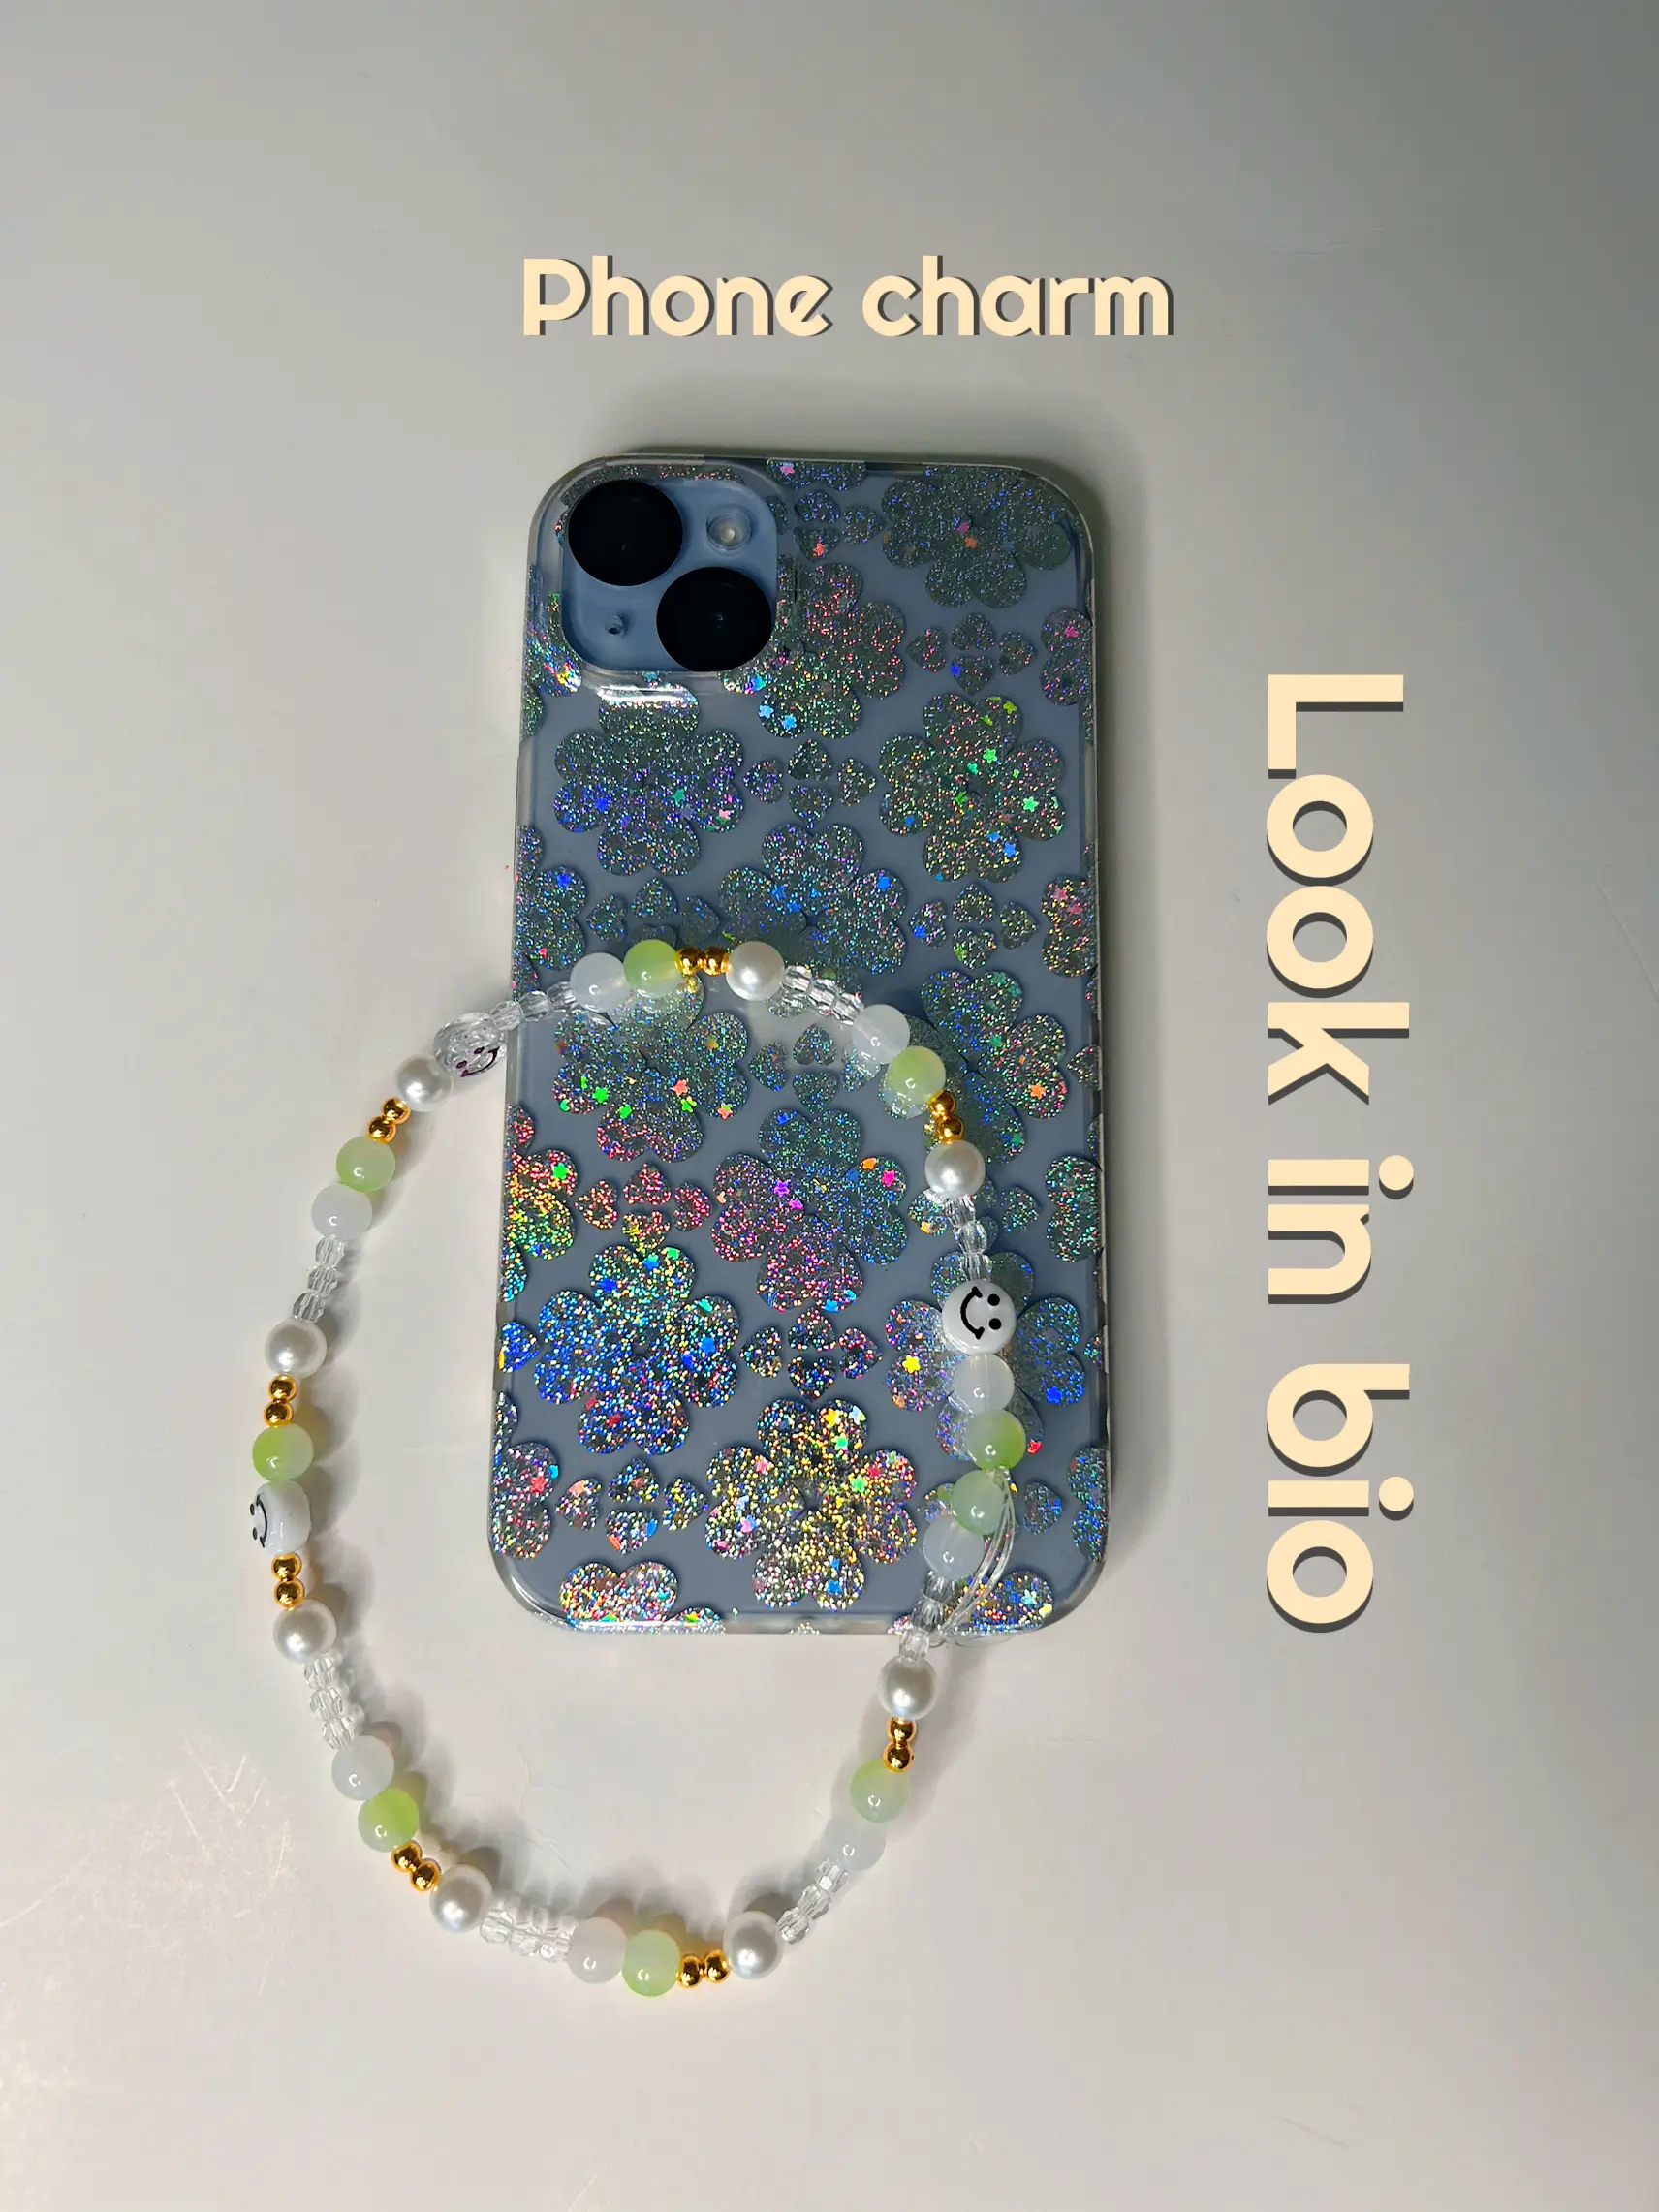 Calico critter phone charm, Gallery posted by Rayna